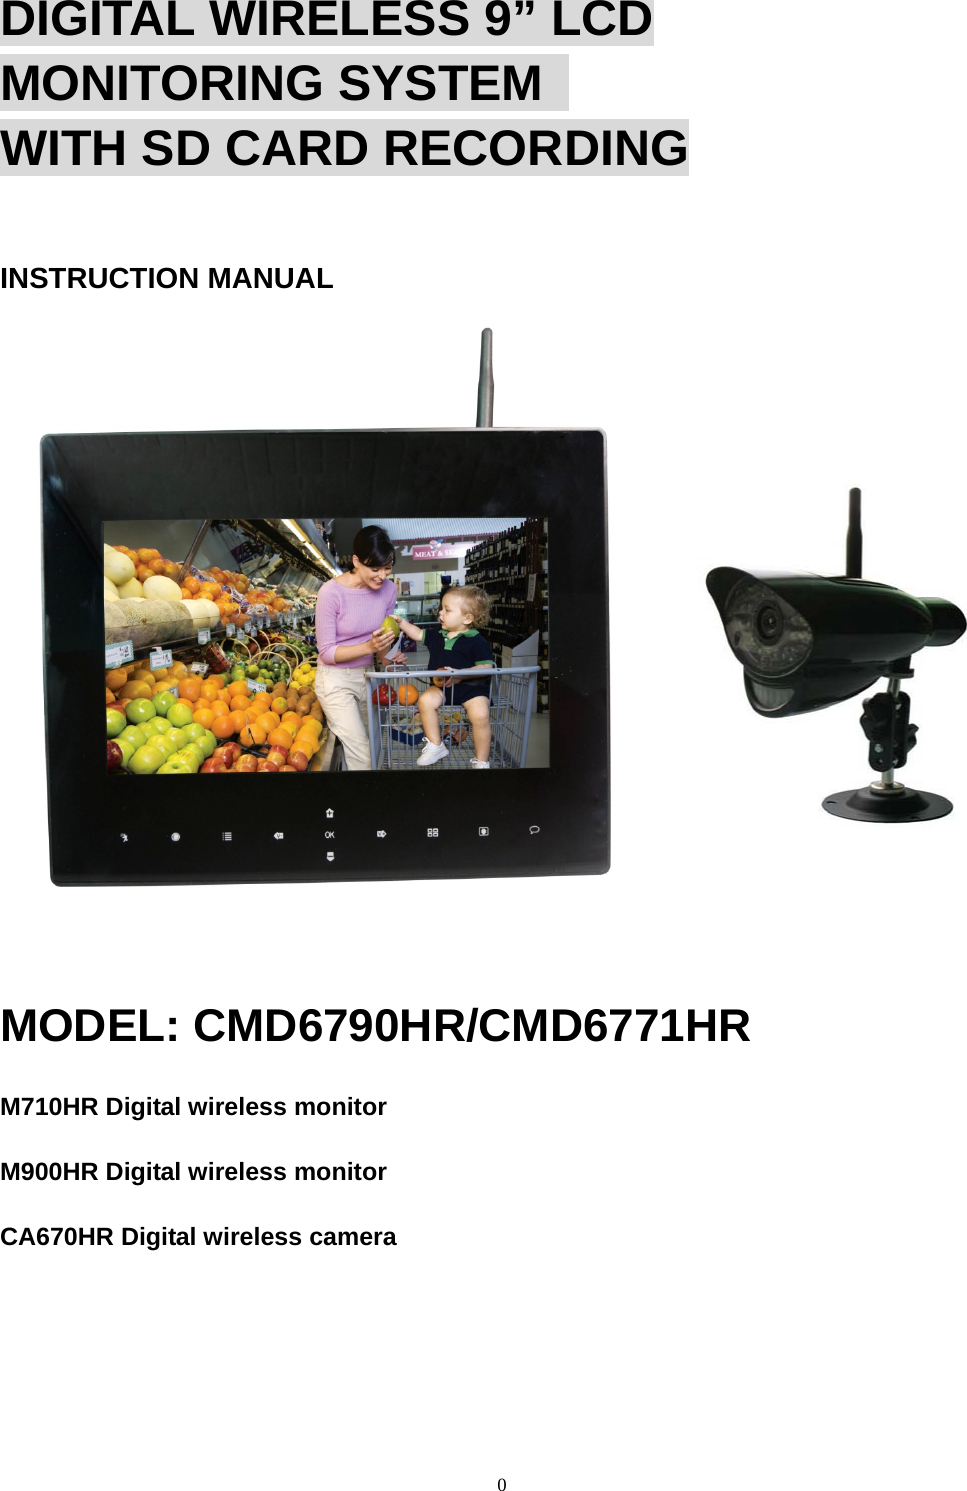 0  DIGITAL WIRELESS 9” LCD MONITORING SYSTEM   WITH SD CARD RECORDING INSTRUCTION MANUAL        MODEL: CMD6790HR/CMD6771HR M710HR Digital wireless monitor M900HR Digital wireless monitor CA670HR Digital wireless camera  